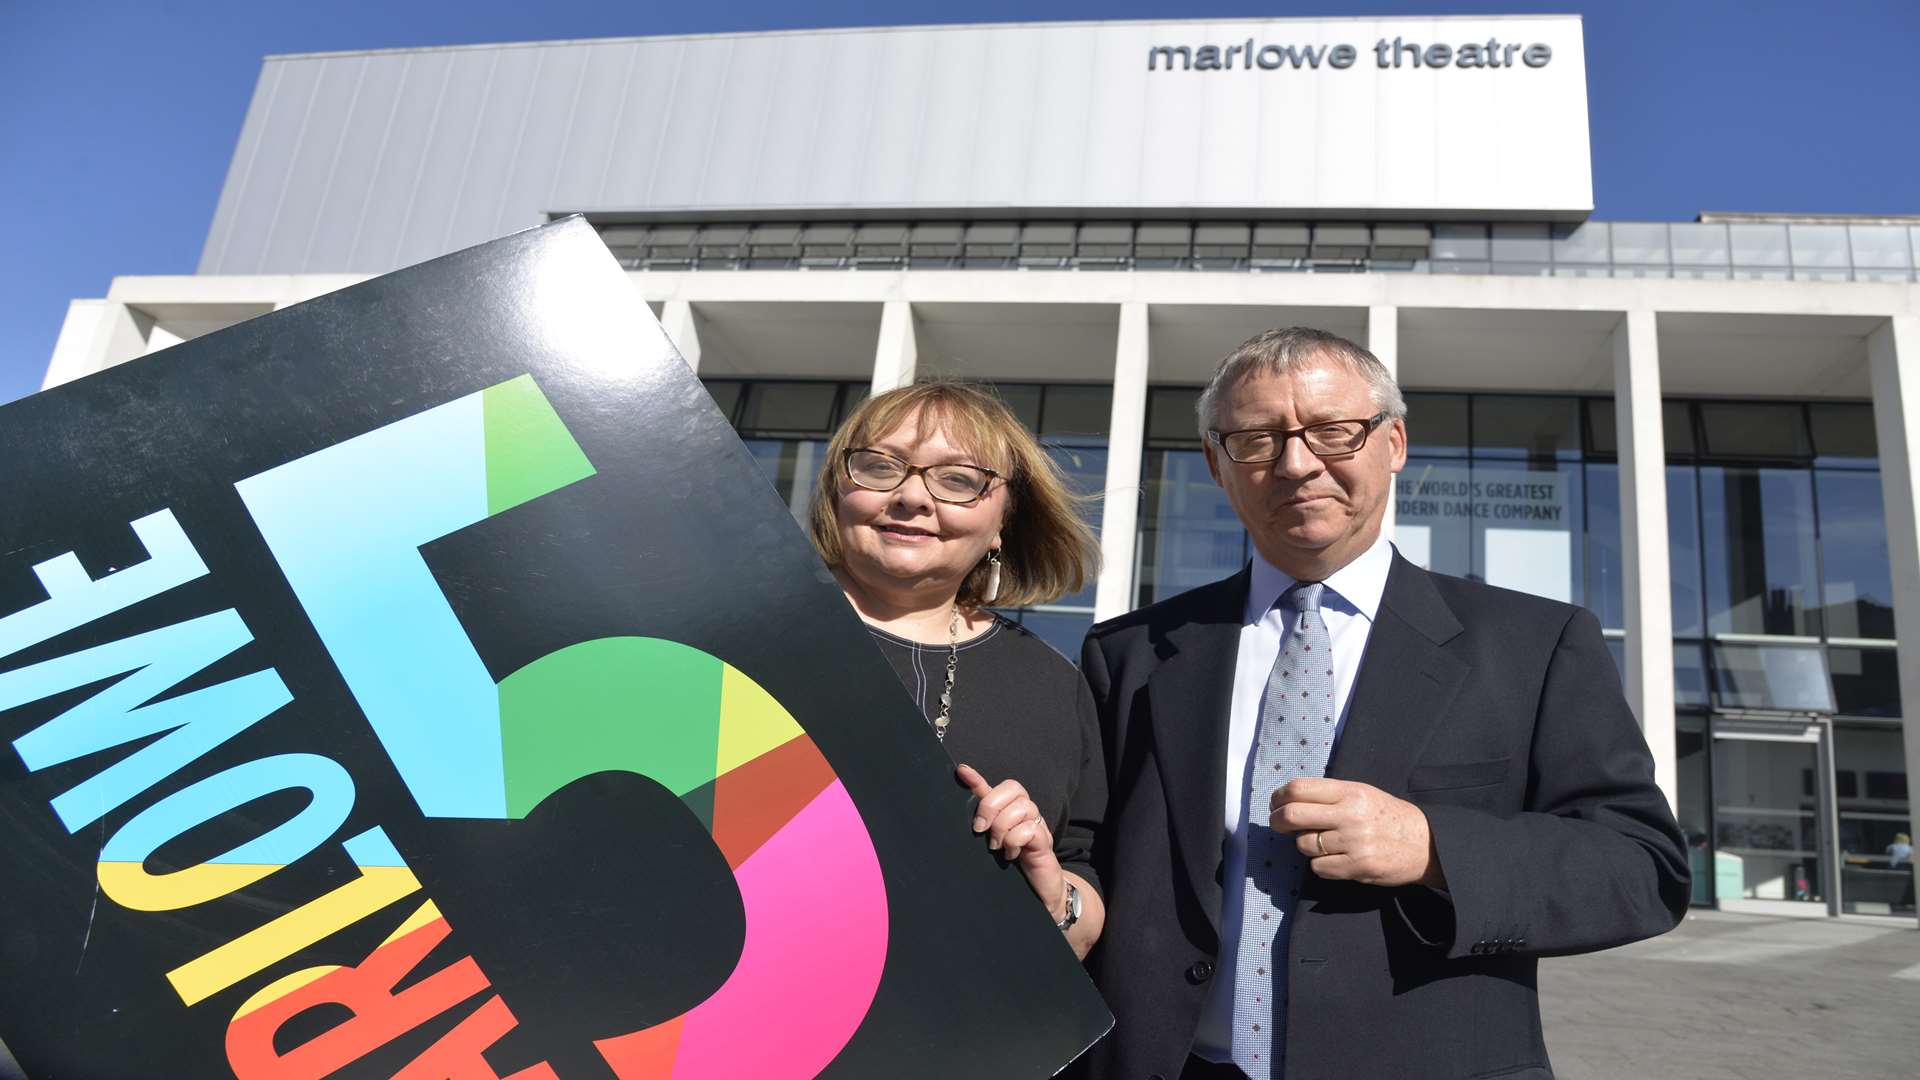 Assistant director of commisioned services Janice McGuinness and theatre director Mark Everett outside the Marlowe Theatre as they celebrate five successful years